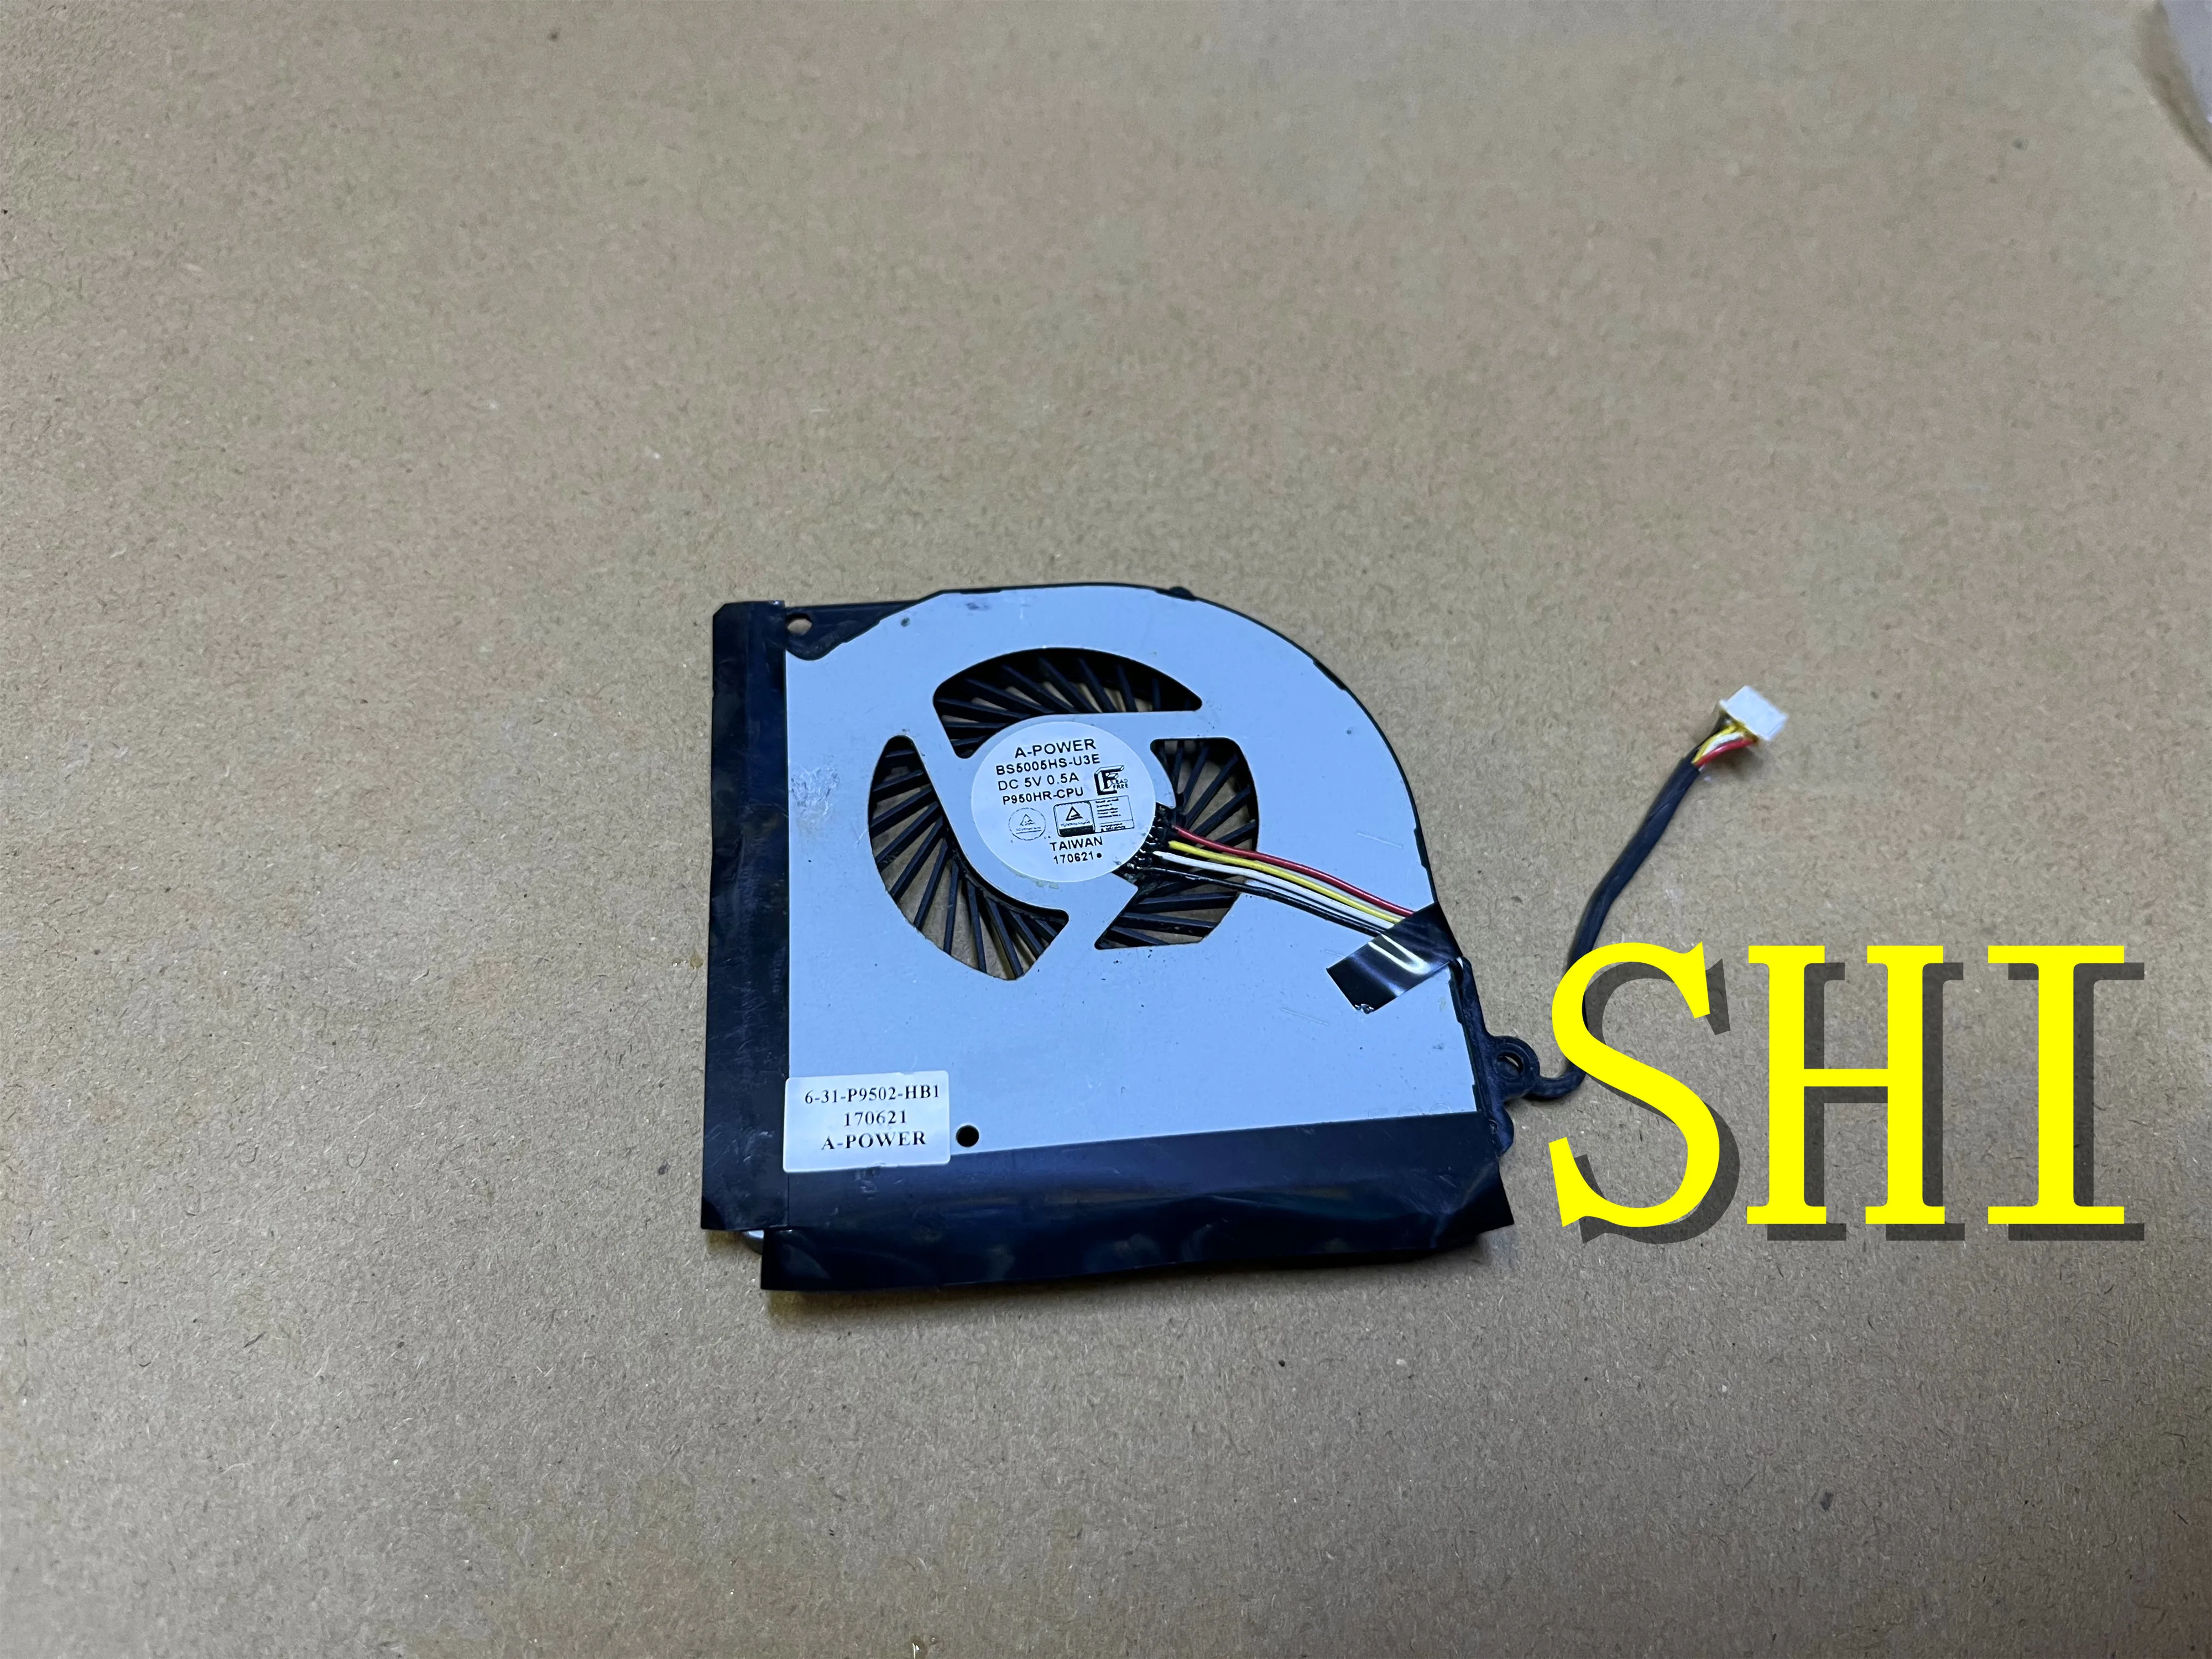 

6-31-P9502-HB1 FOR Original used CPU Fan For CLEVO P950 P950ER P950HR BS5005HS-U3E 6-31-P9502-HB0 5V 0.5A 4wires free shipping